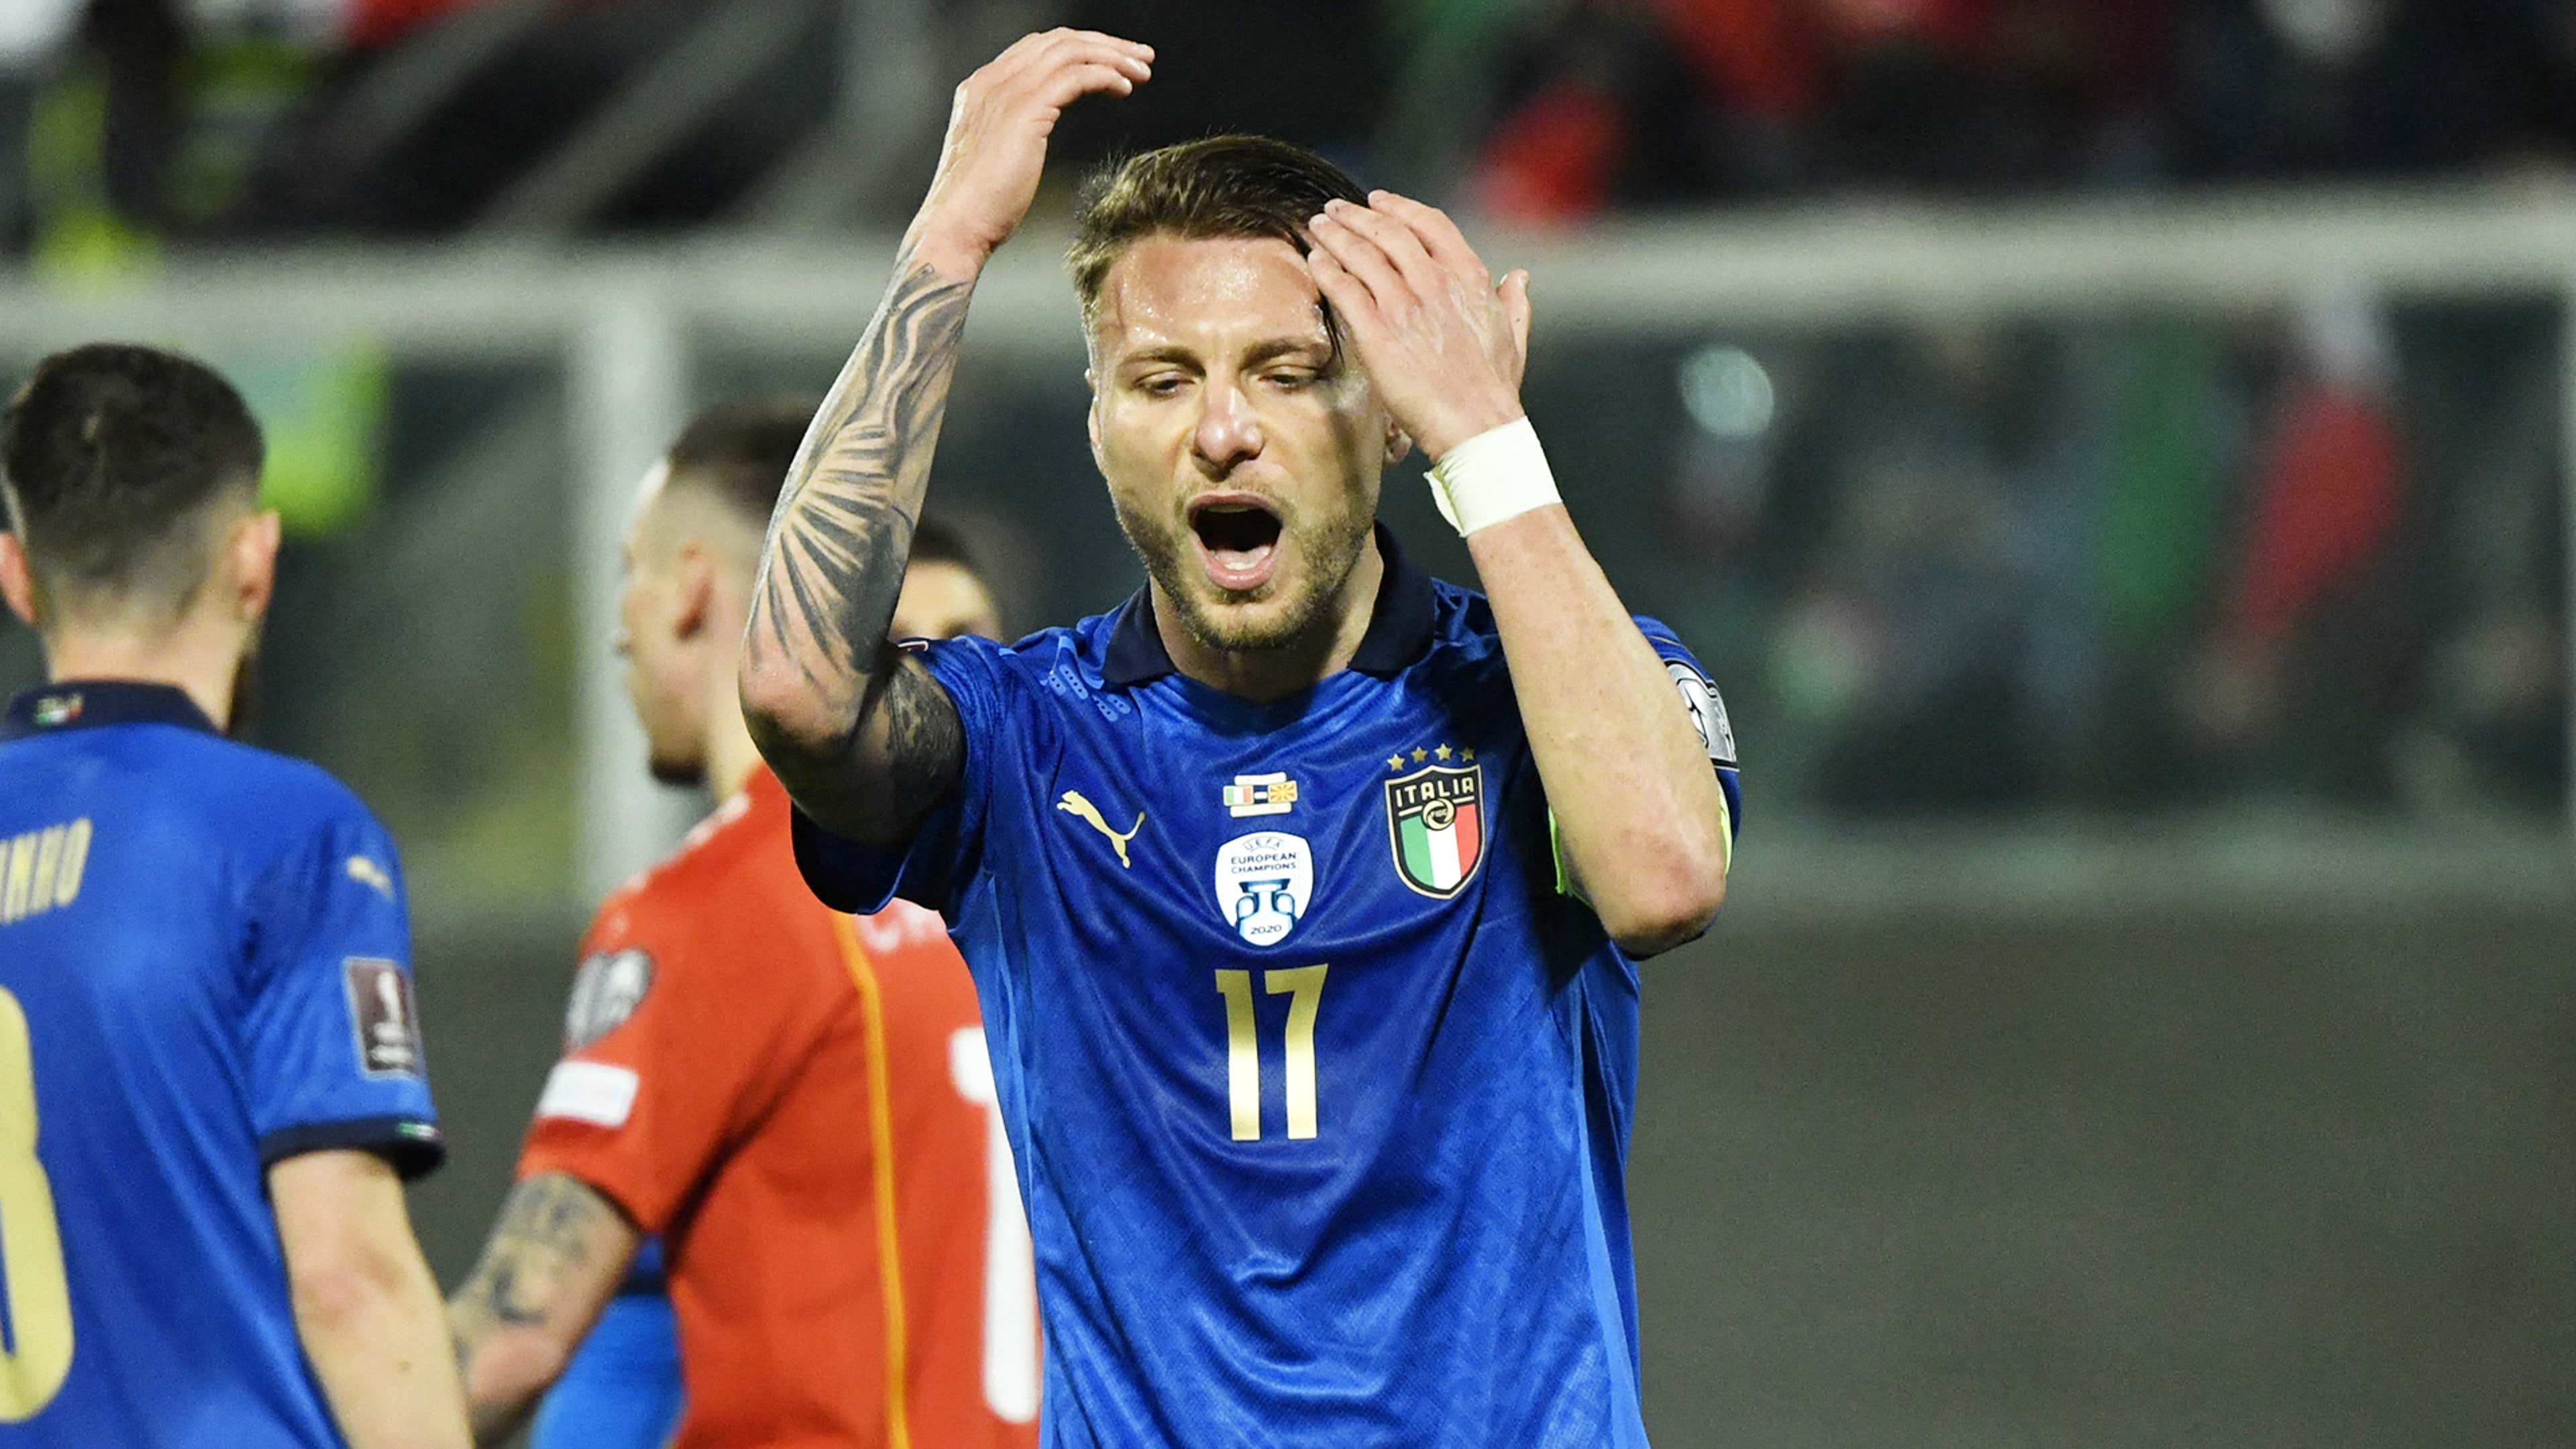 Football Italia  Italian football news, analysis, fixtures and results for  the latest from Serie A, Serie B and the Azzurri. - Football Italia